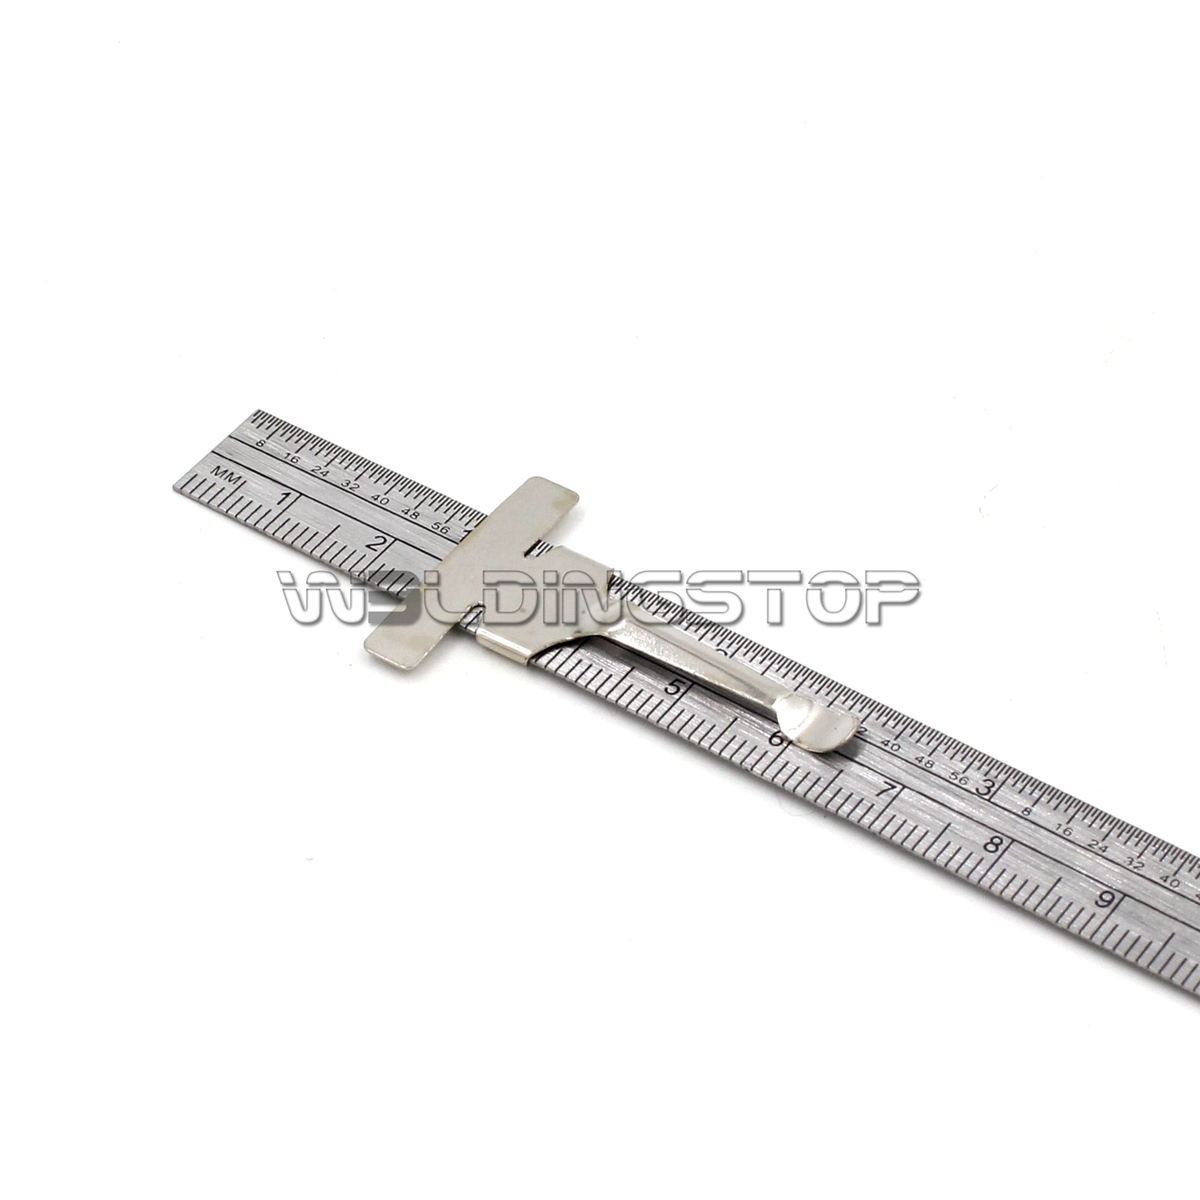 Details about   Depth Gauge Pocket Clip Inch Metric Equivalent Stainless Steel Muli-Use Ruler 